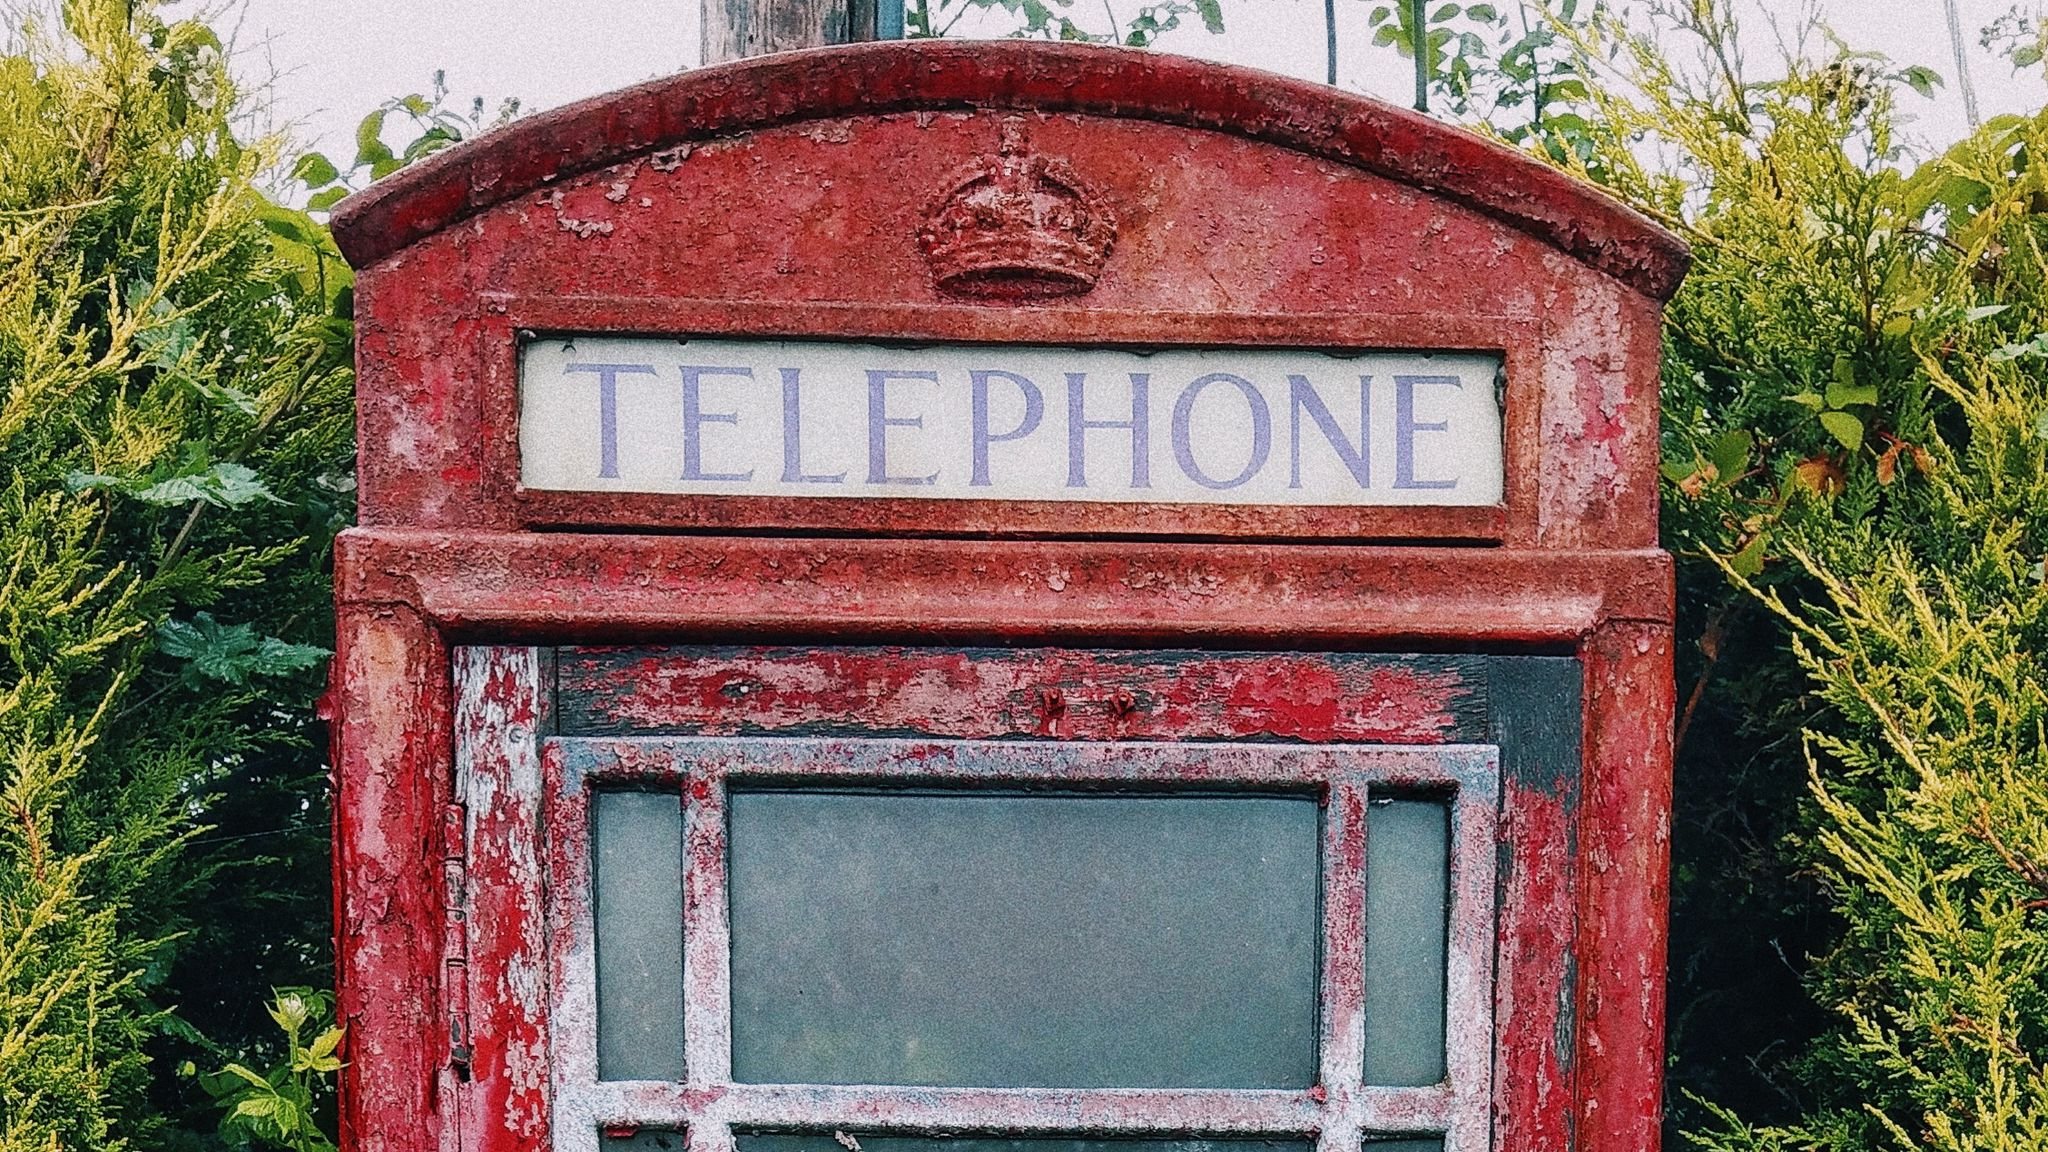 Download wallpaper 2048x1152 telephone booth, old, shabby ultrawide monitor HD background